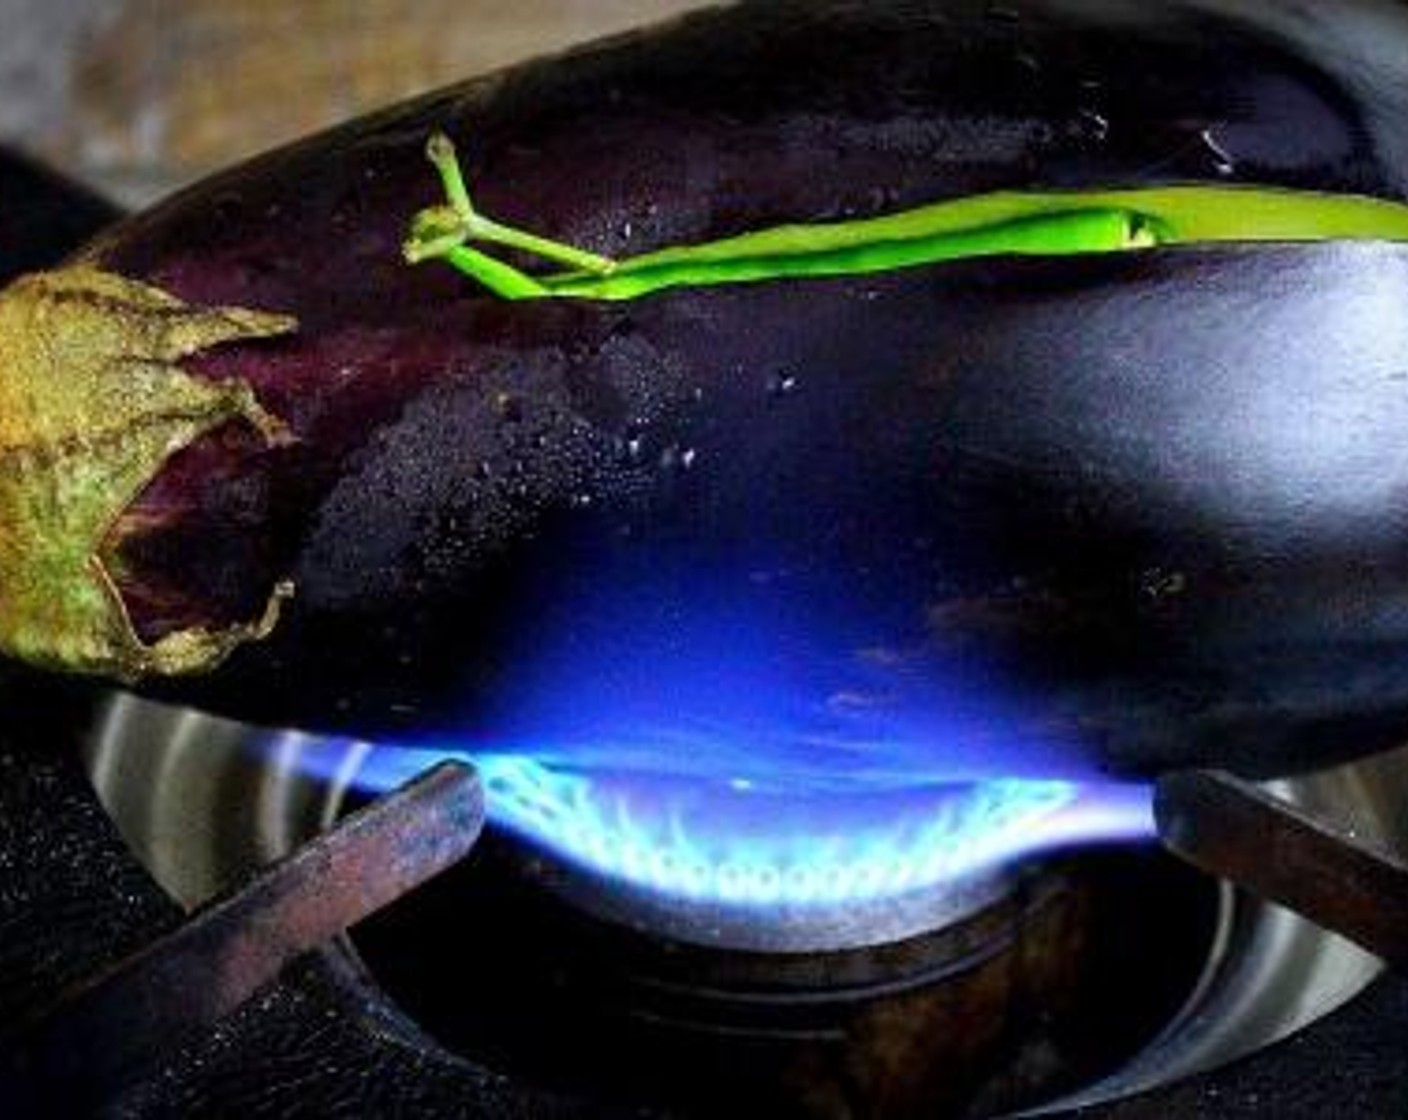 step 5 Roast the eggplant directly over direct flame. Keep turning it around so that the skin gets charred and the insides of the eggplant get cooked well. Once done remove from the flame and let the eggplant cool down completely.